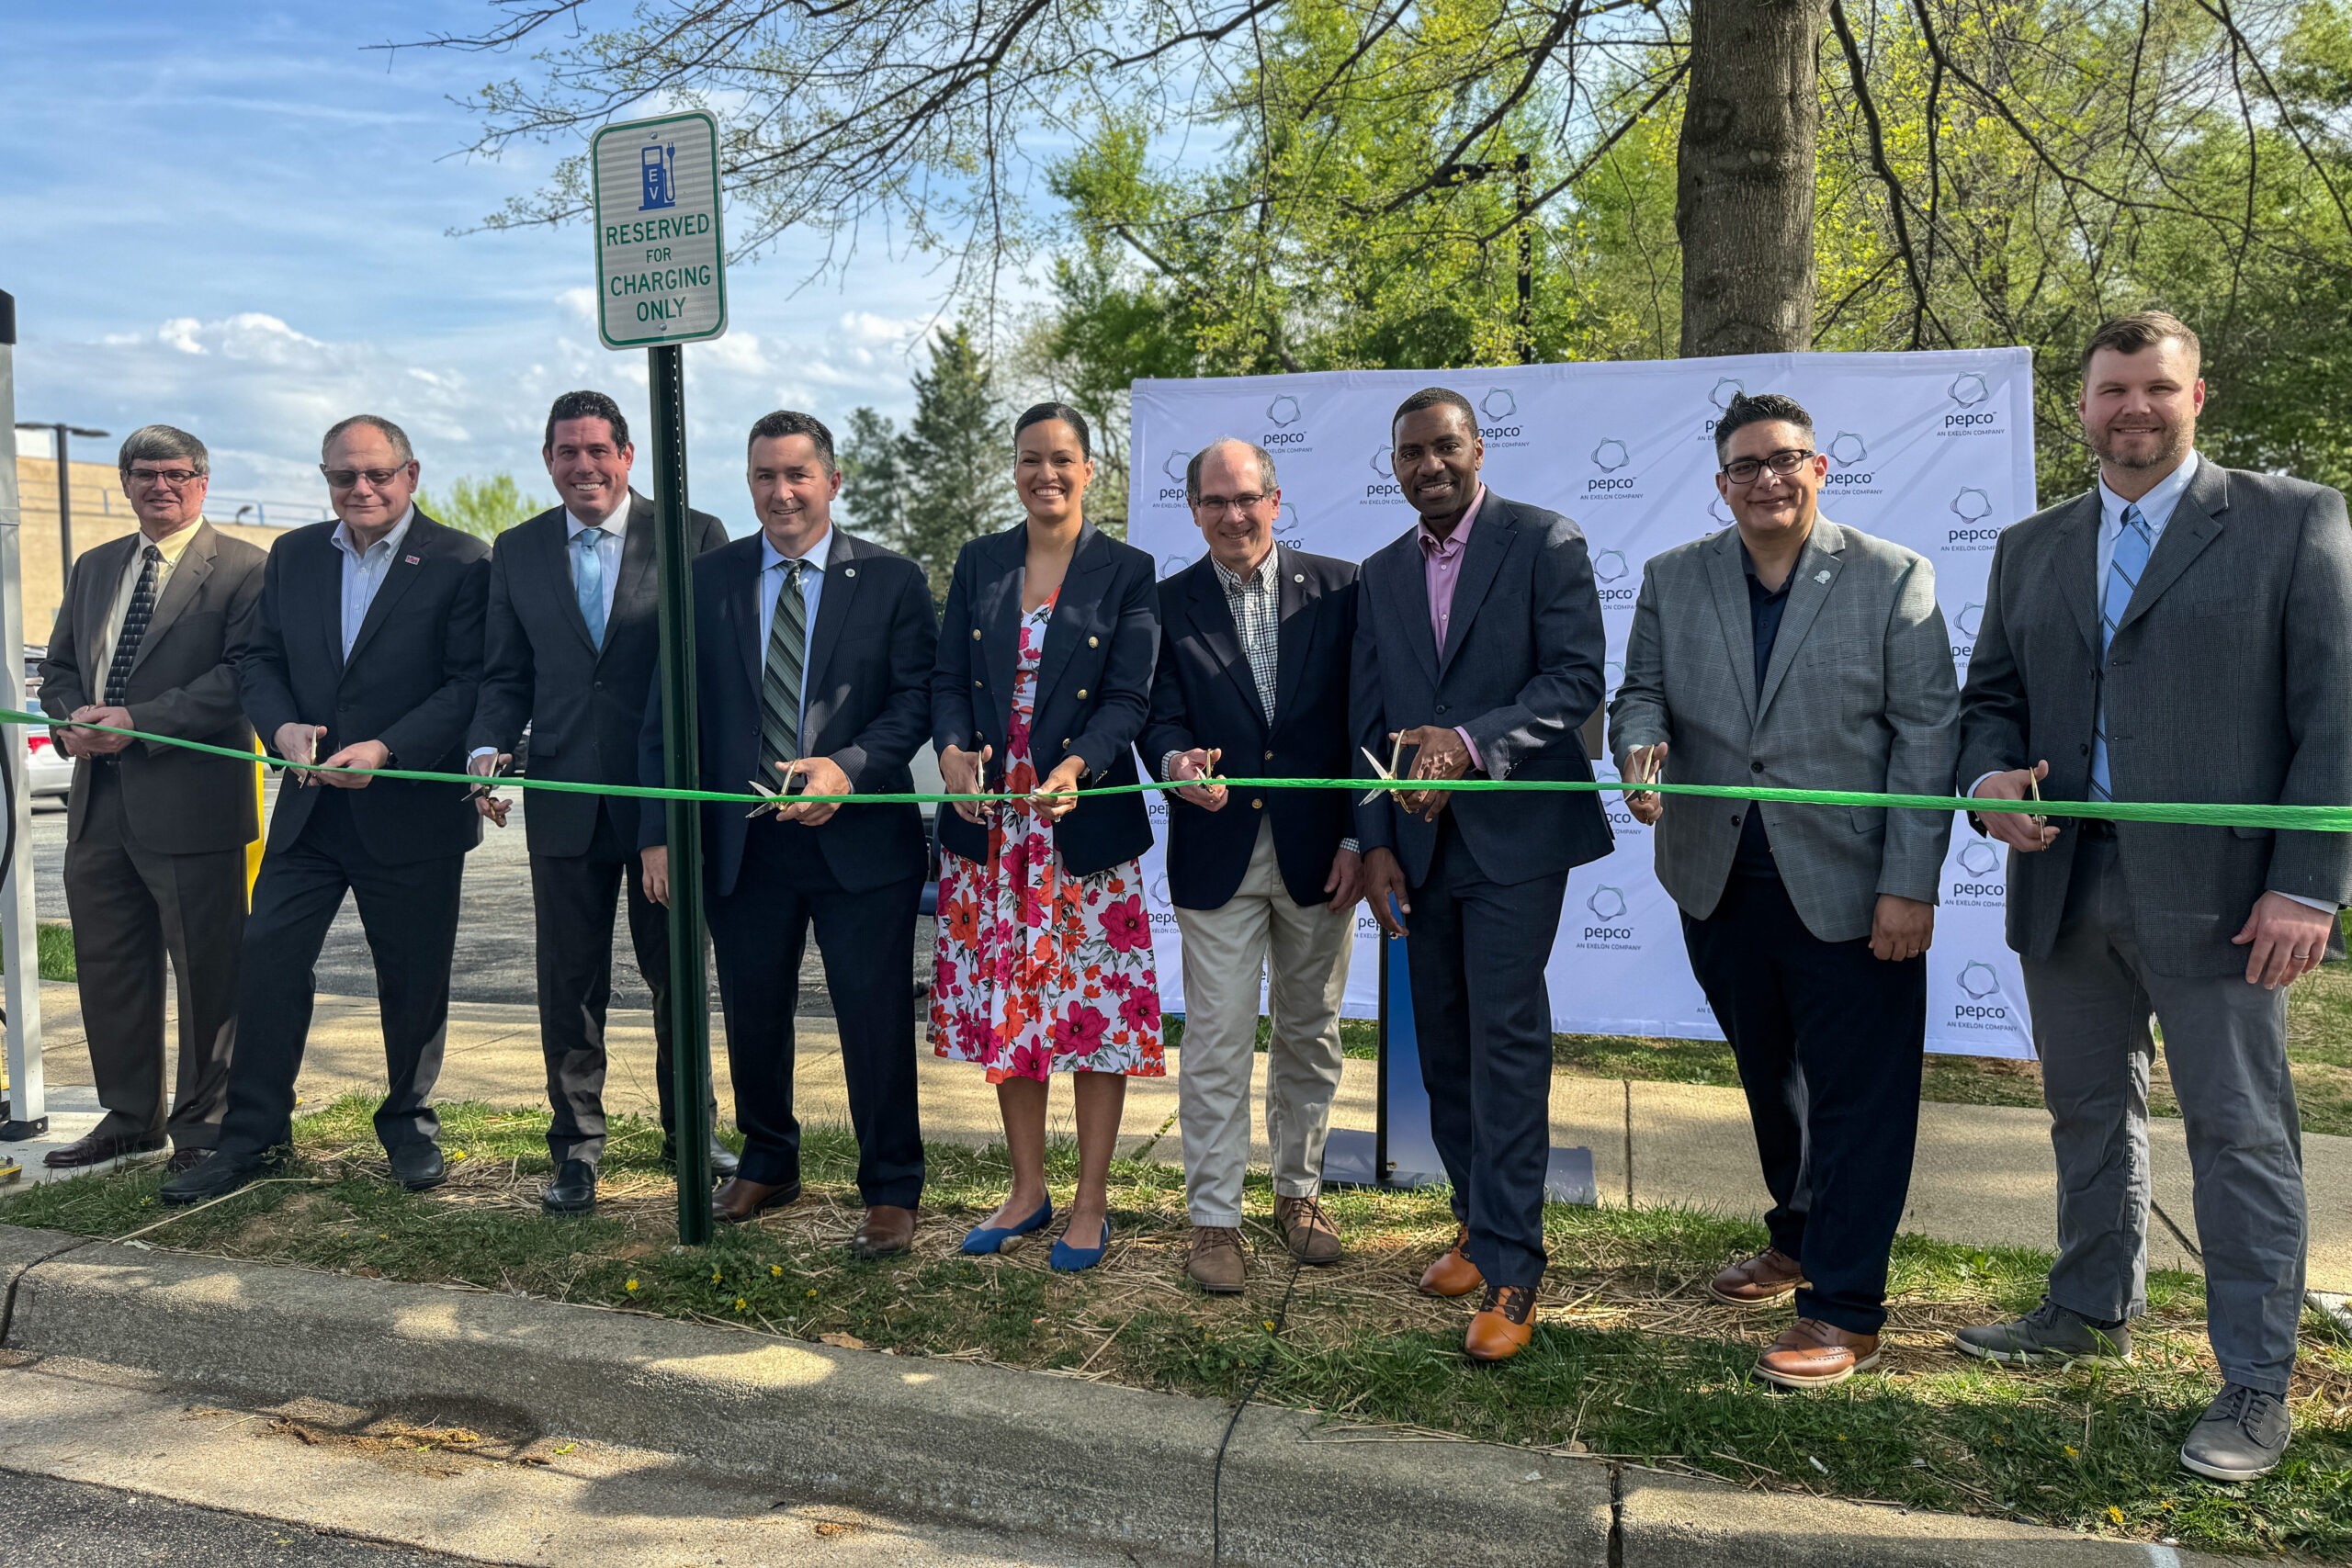 Members of the Montgomery County Council, Rockville Mayor and Council, the city’s Environment Commission, city staff and Pepco officials hold scissors and prepare to cut a green ribbon near a sign reading "Reserved for Charging Only" that is next to two new electric vehicle charging stations on Vinson Street.